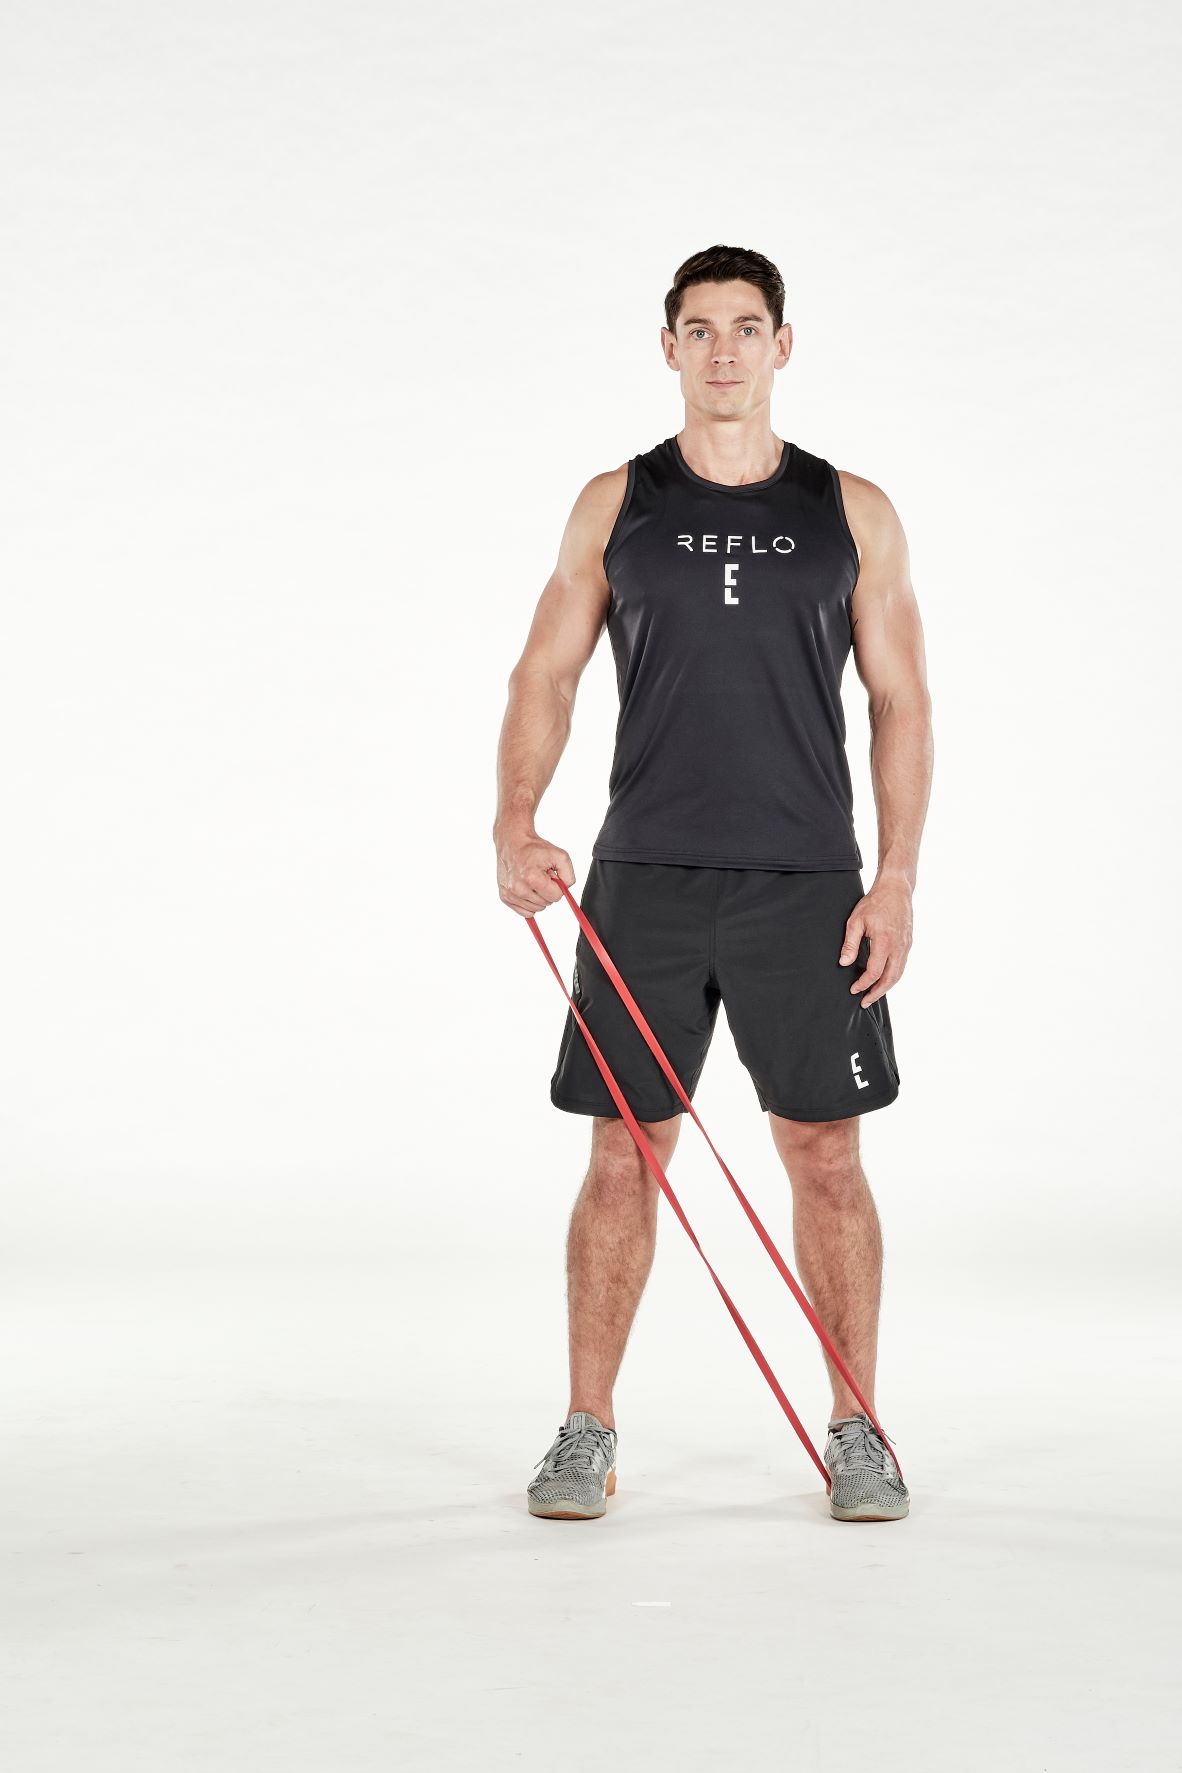 man demonstrating step one of resistance band lateral raise; standing up straight, a resistance band is held under one foot; he holds the resistance band at hip height with the opposite hand; he wears a black fitness vest, black shorts and trainers